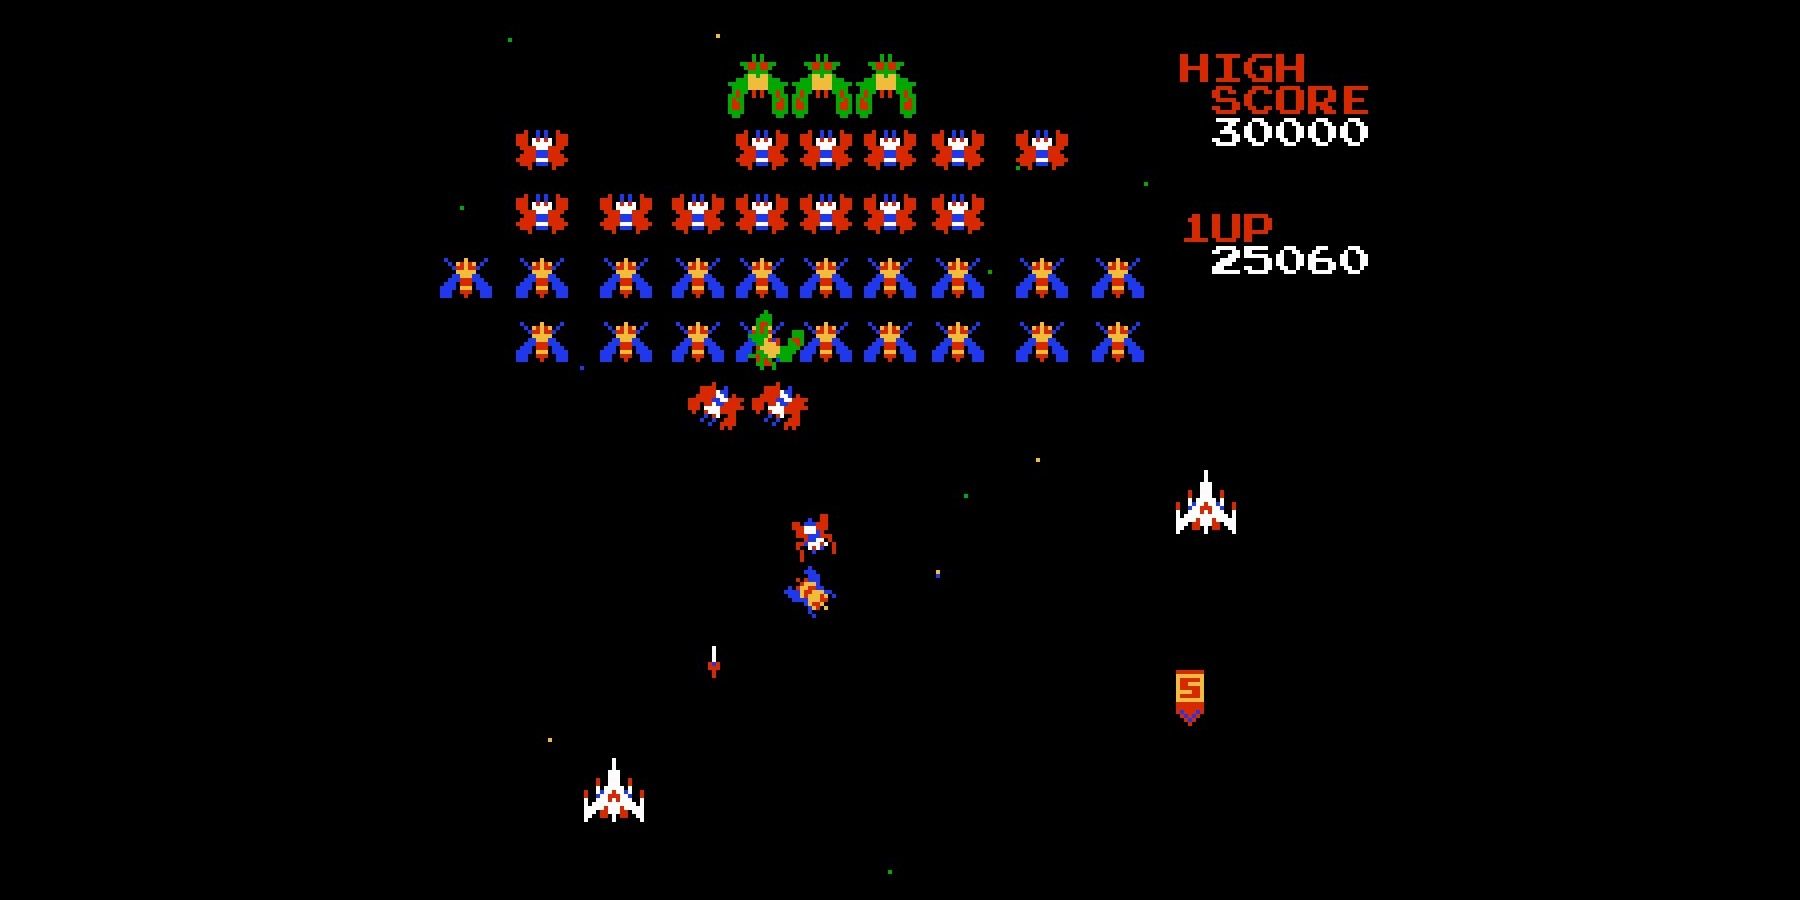 Galaga being played in an arcade.